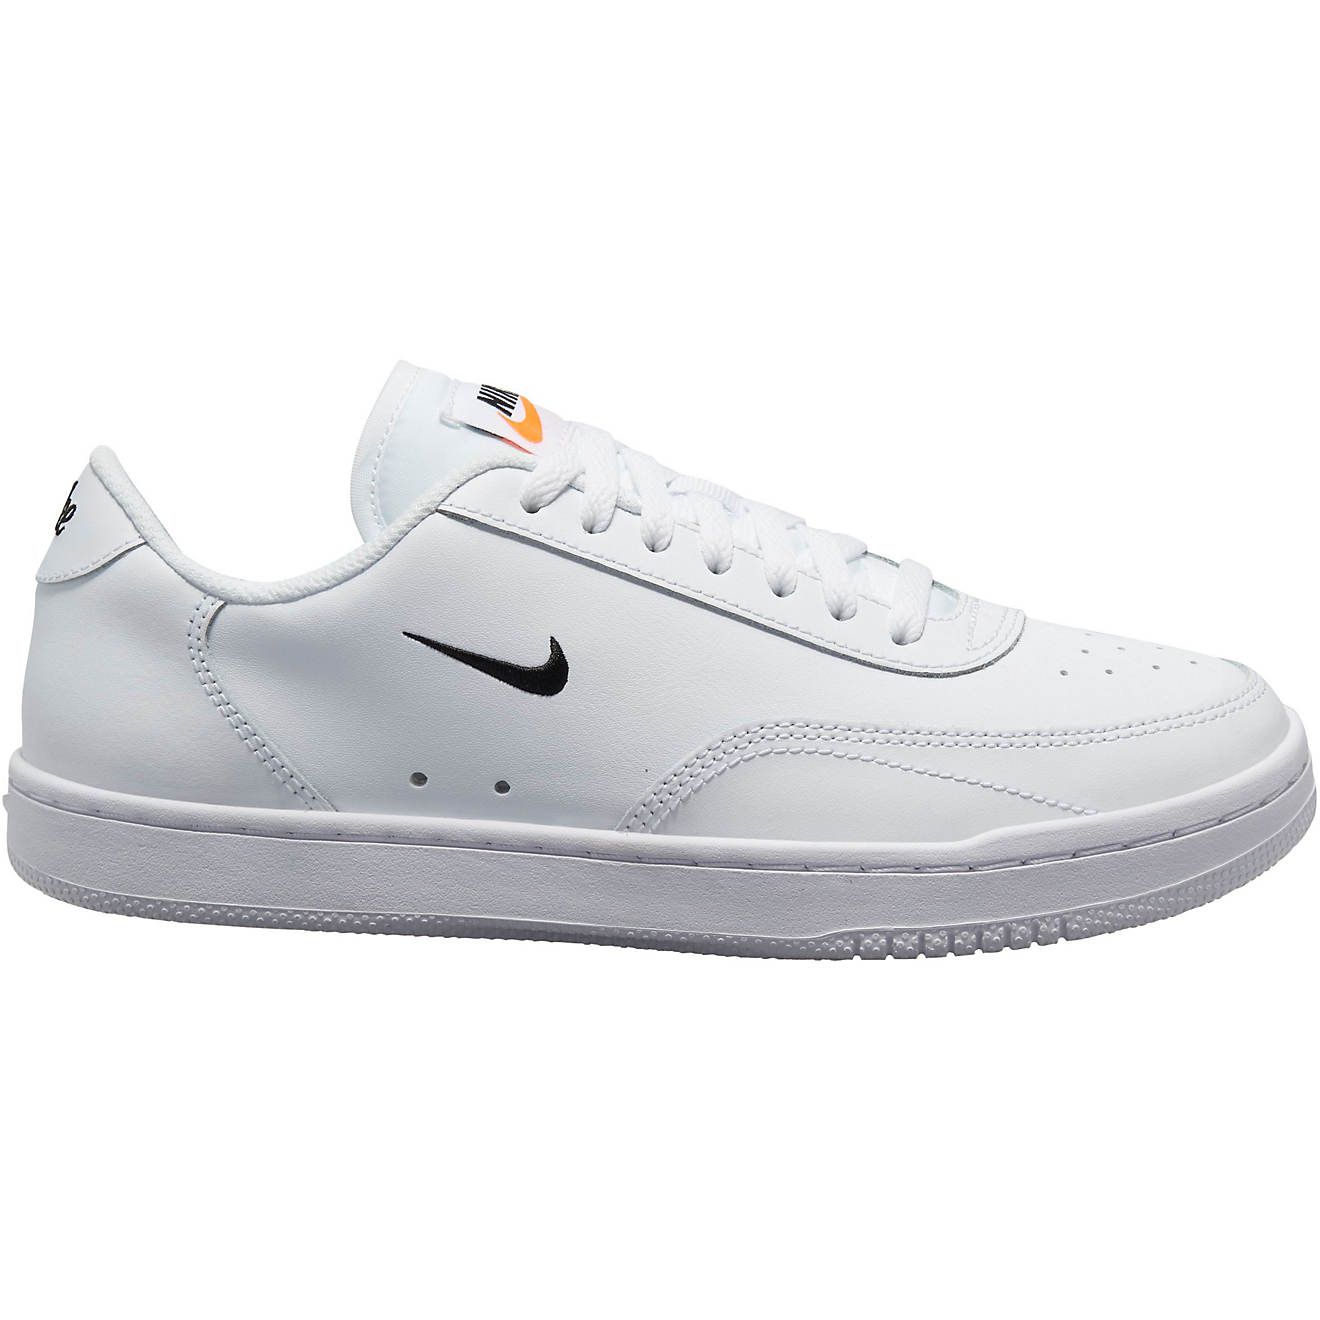 Nike Women's Court Vintage Tennis Shoes | Academy Sports + Outdoor Affiliate